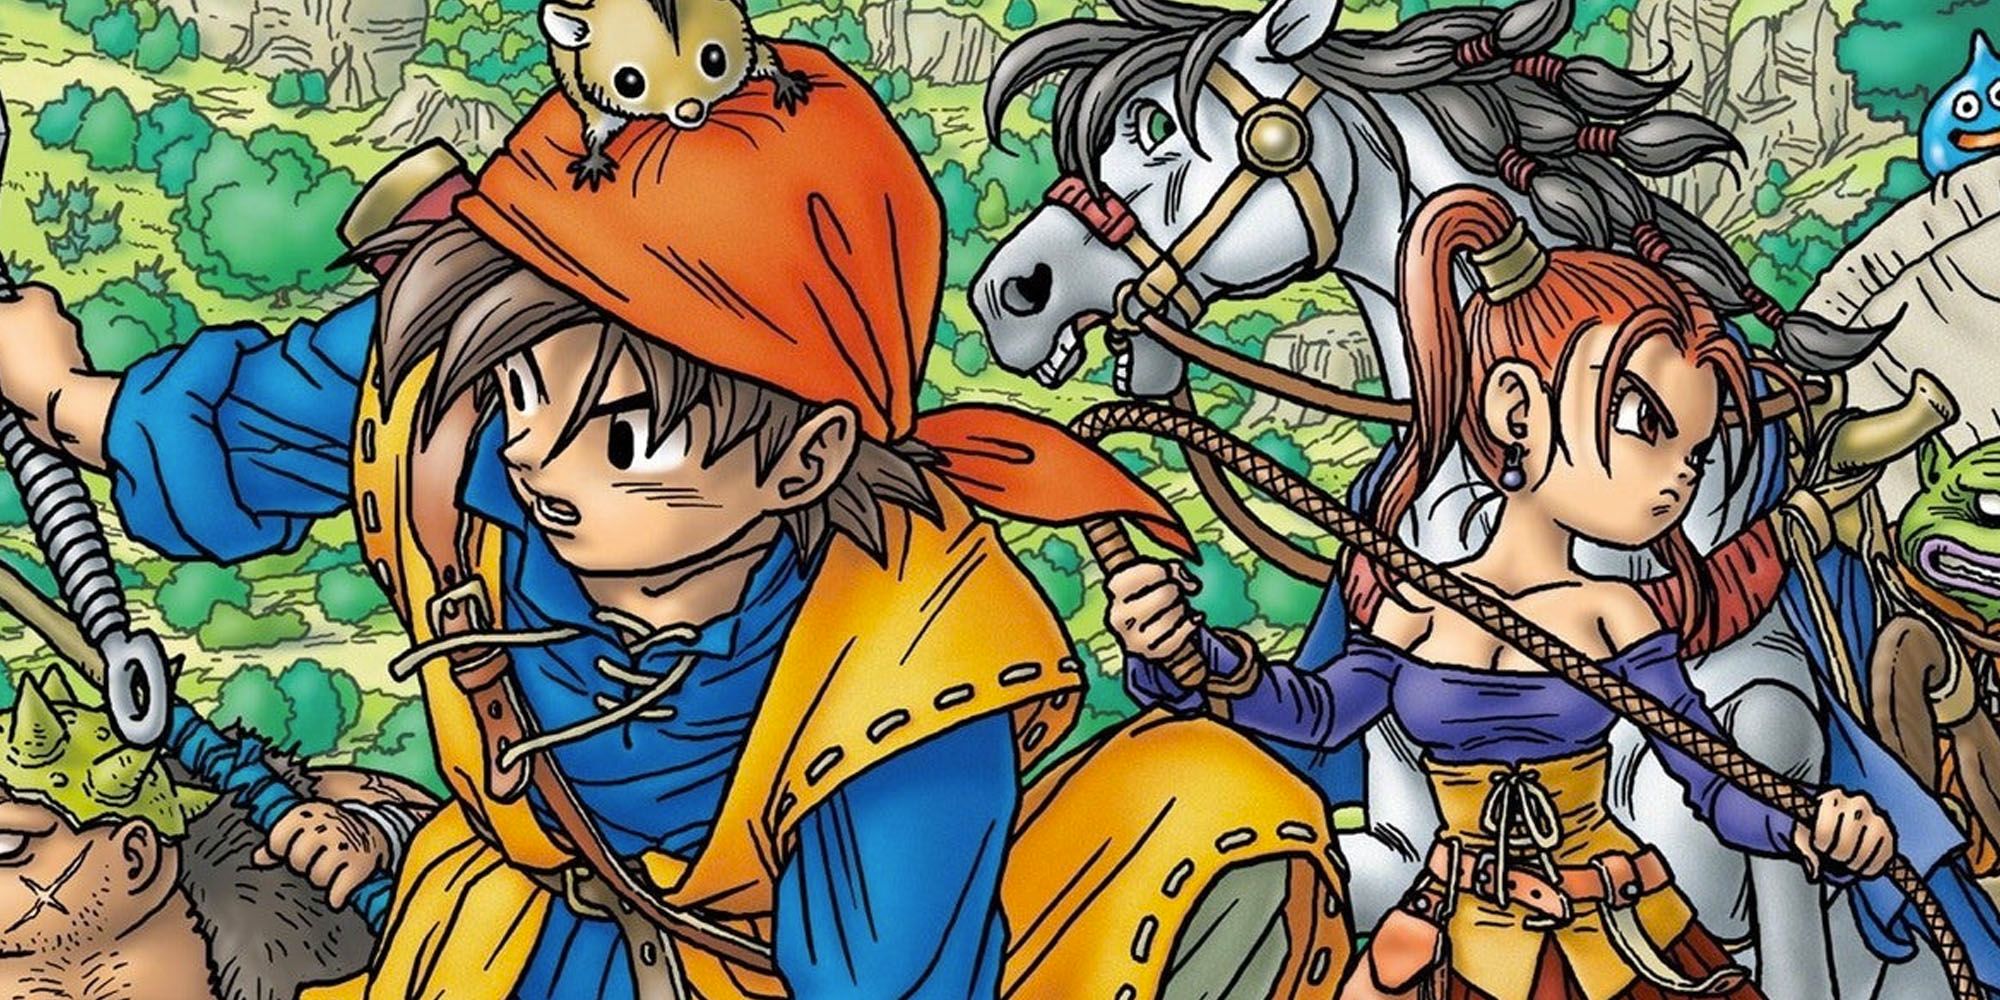 Dragon Quest 8 artwork featuring the hero and multiple other characters